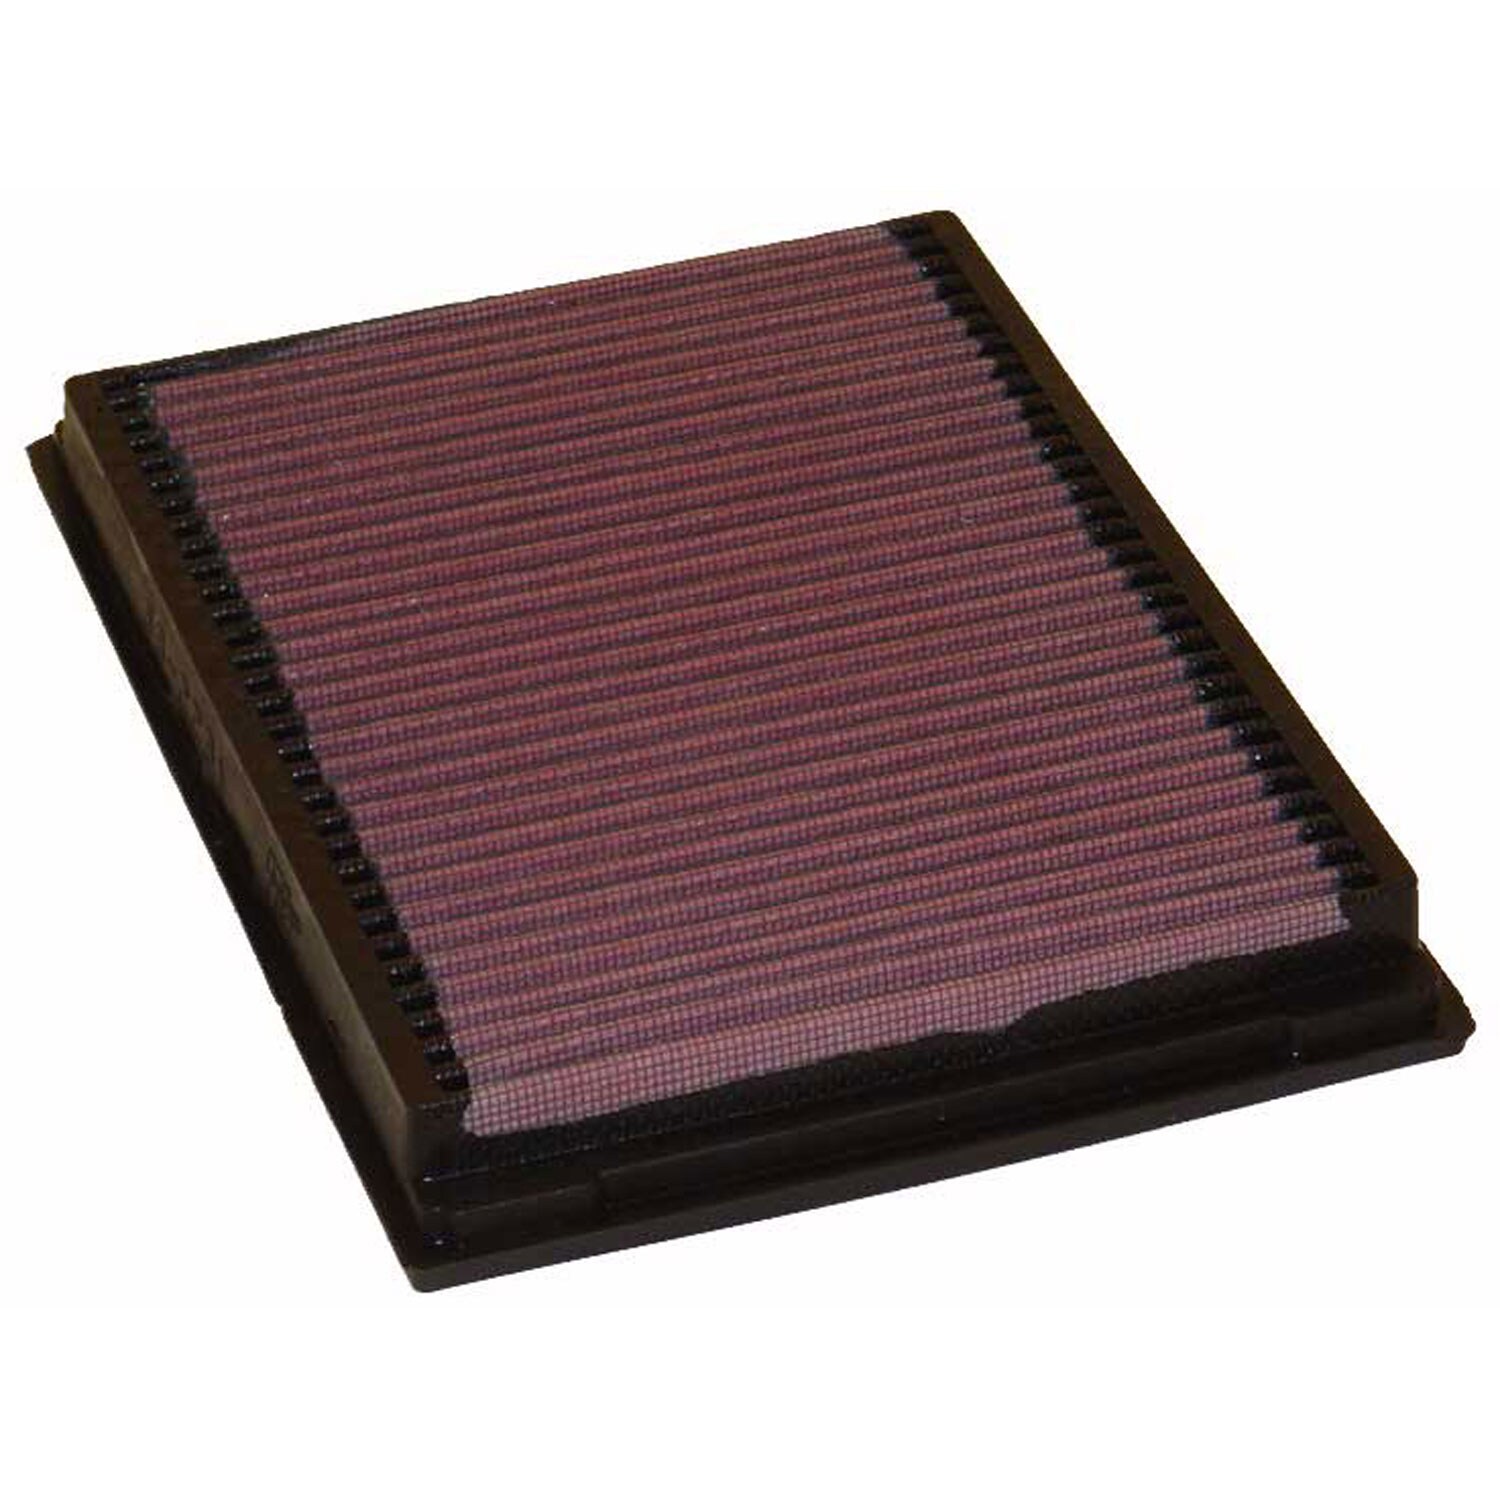 K&N K&N Engine Air Filter: High Performance, Premium, Washable, Replacement Filter: 1996-2007 BMW L6 (325Ci, M3, 320i, 325Ti and other select models), 33-2231 in the Automotive Hardware department at Lowes.com